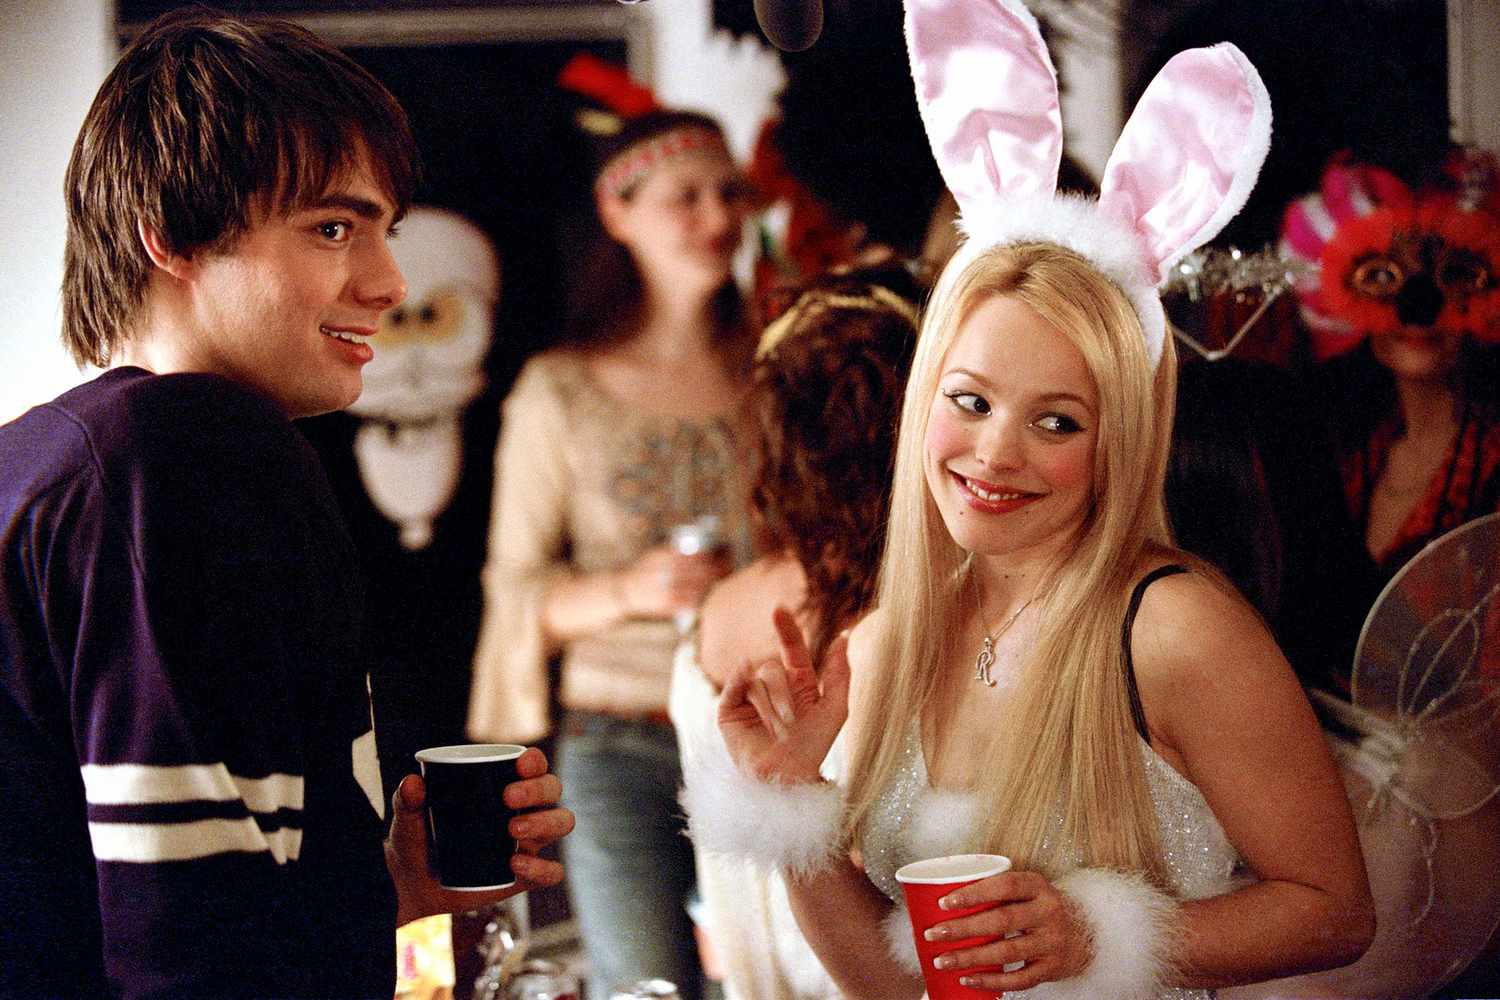 Rachel McAdams wouldn't say no to cameo in 'Mean Girls' movie musical